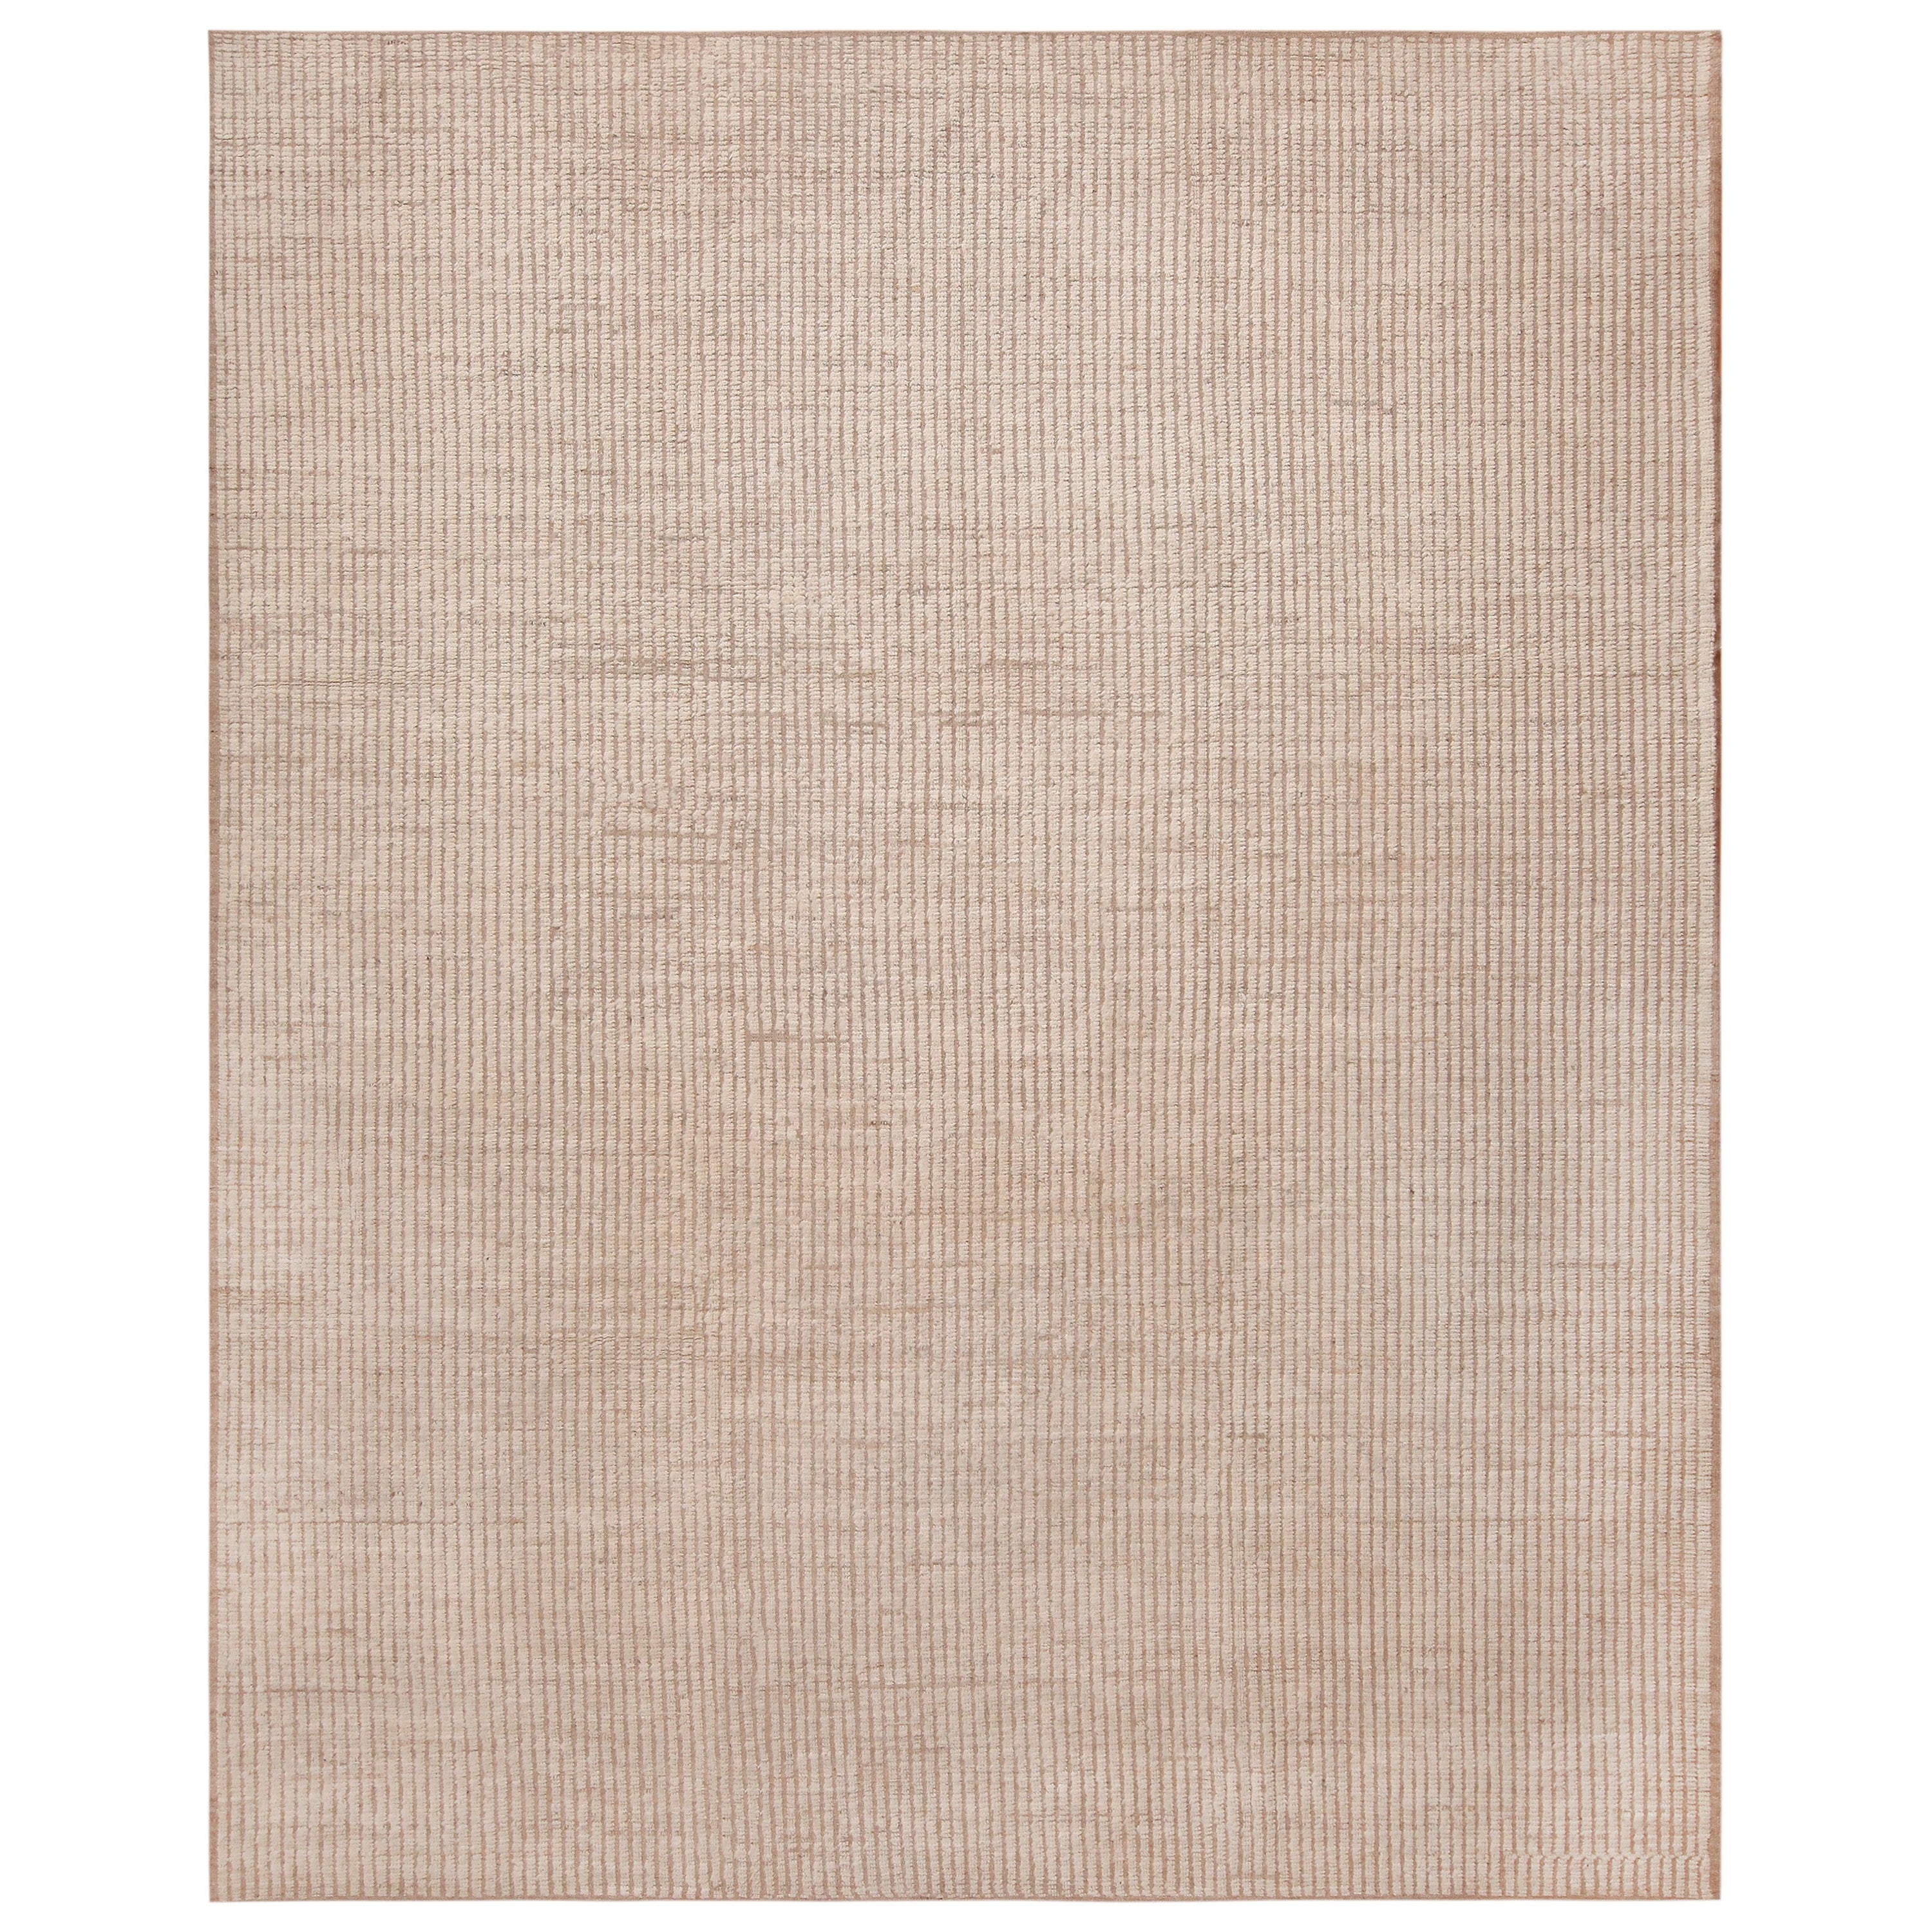 Nazmiyal Collection Minimalist Modern Contemporary Rug. 10 ft 1 in x 12 ft 2 in For Sale